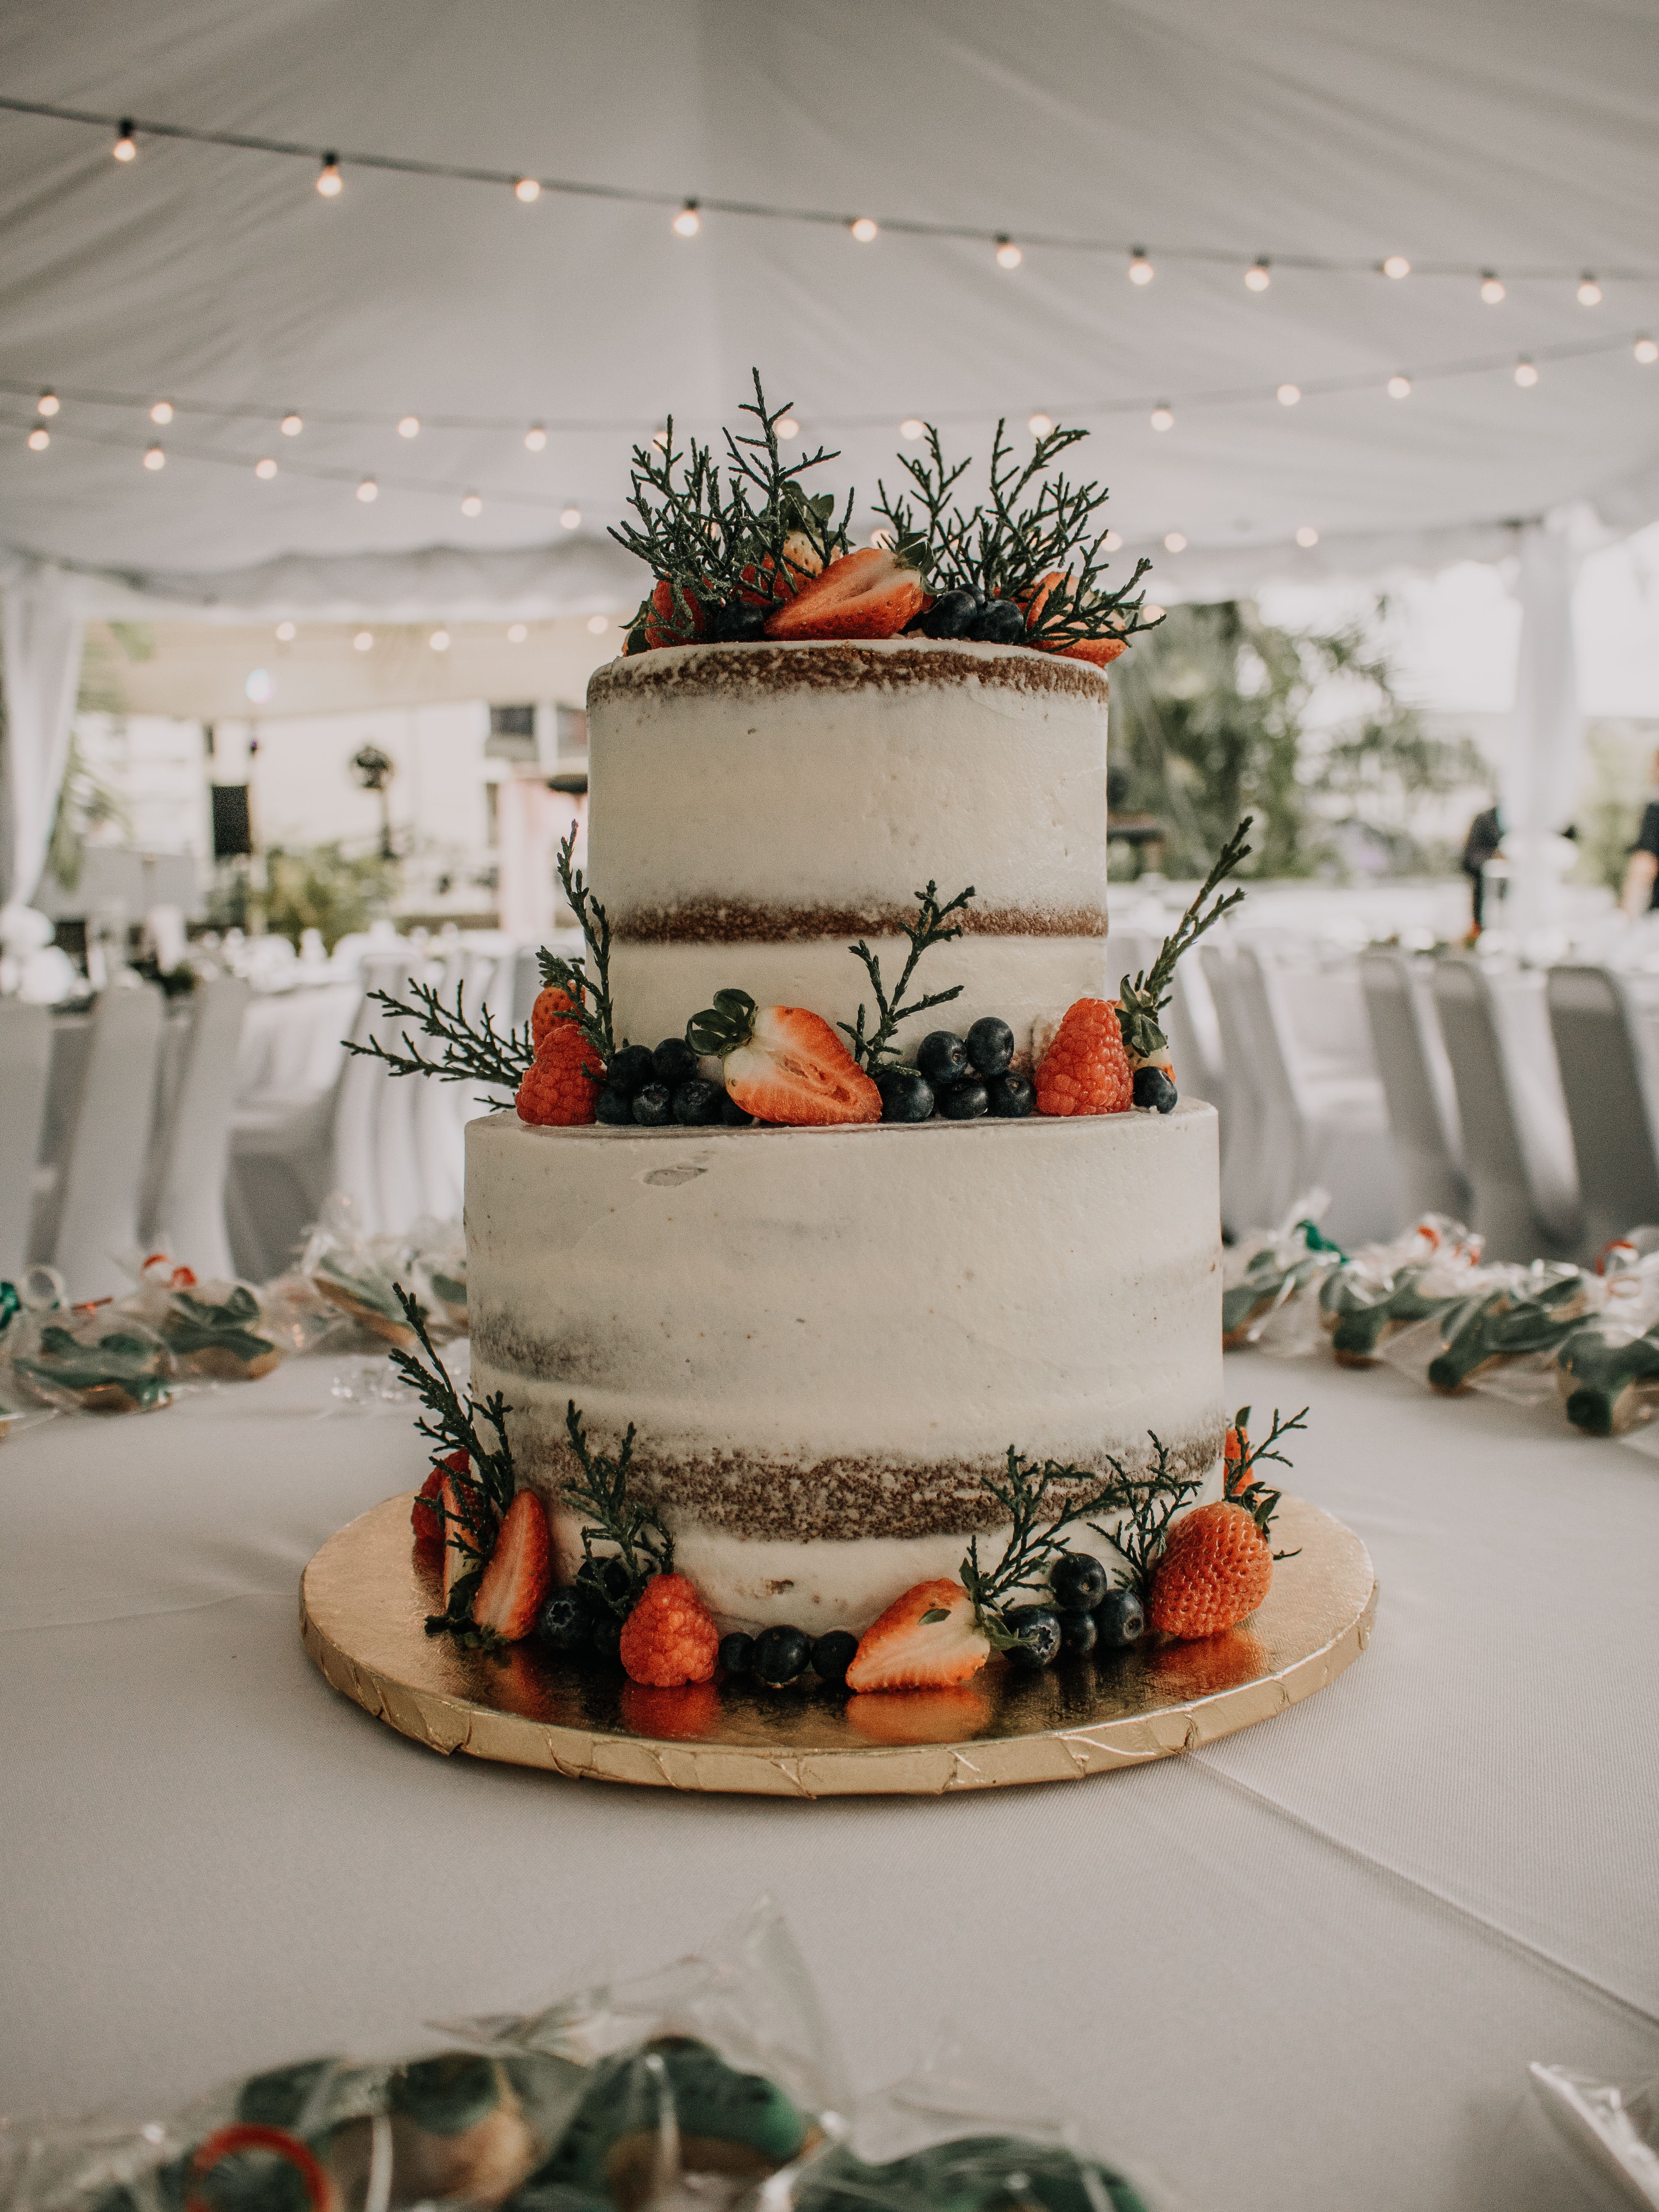 double layer wedding cake with fruit decorations